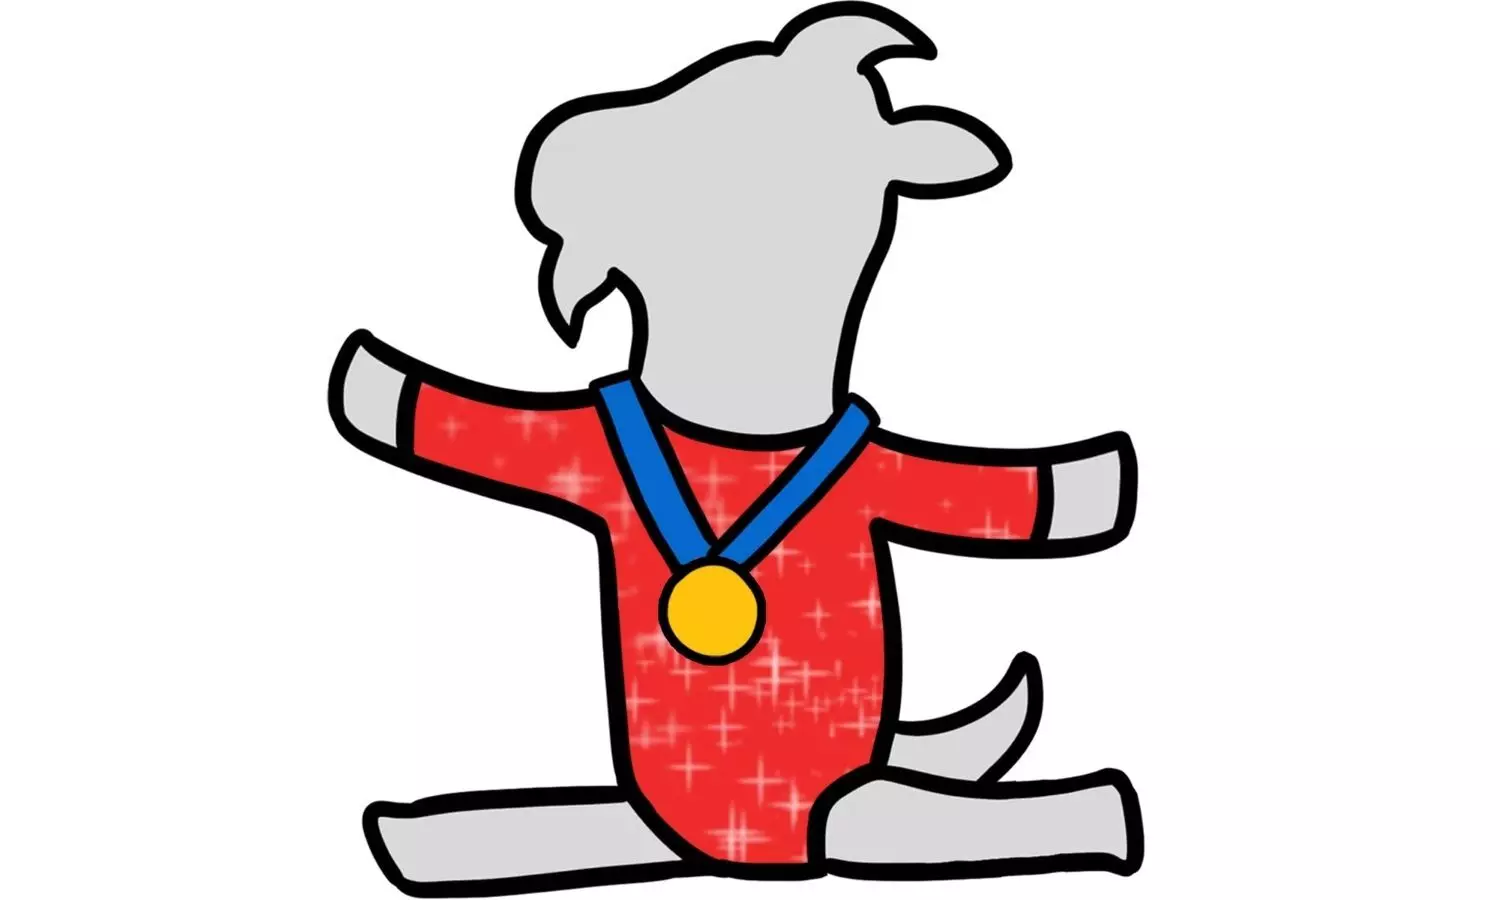 The GOAT Emoji That Has Been Awarded To Simone Biles ( Source: Pop Sugar)